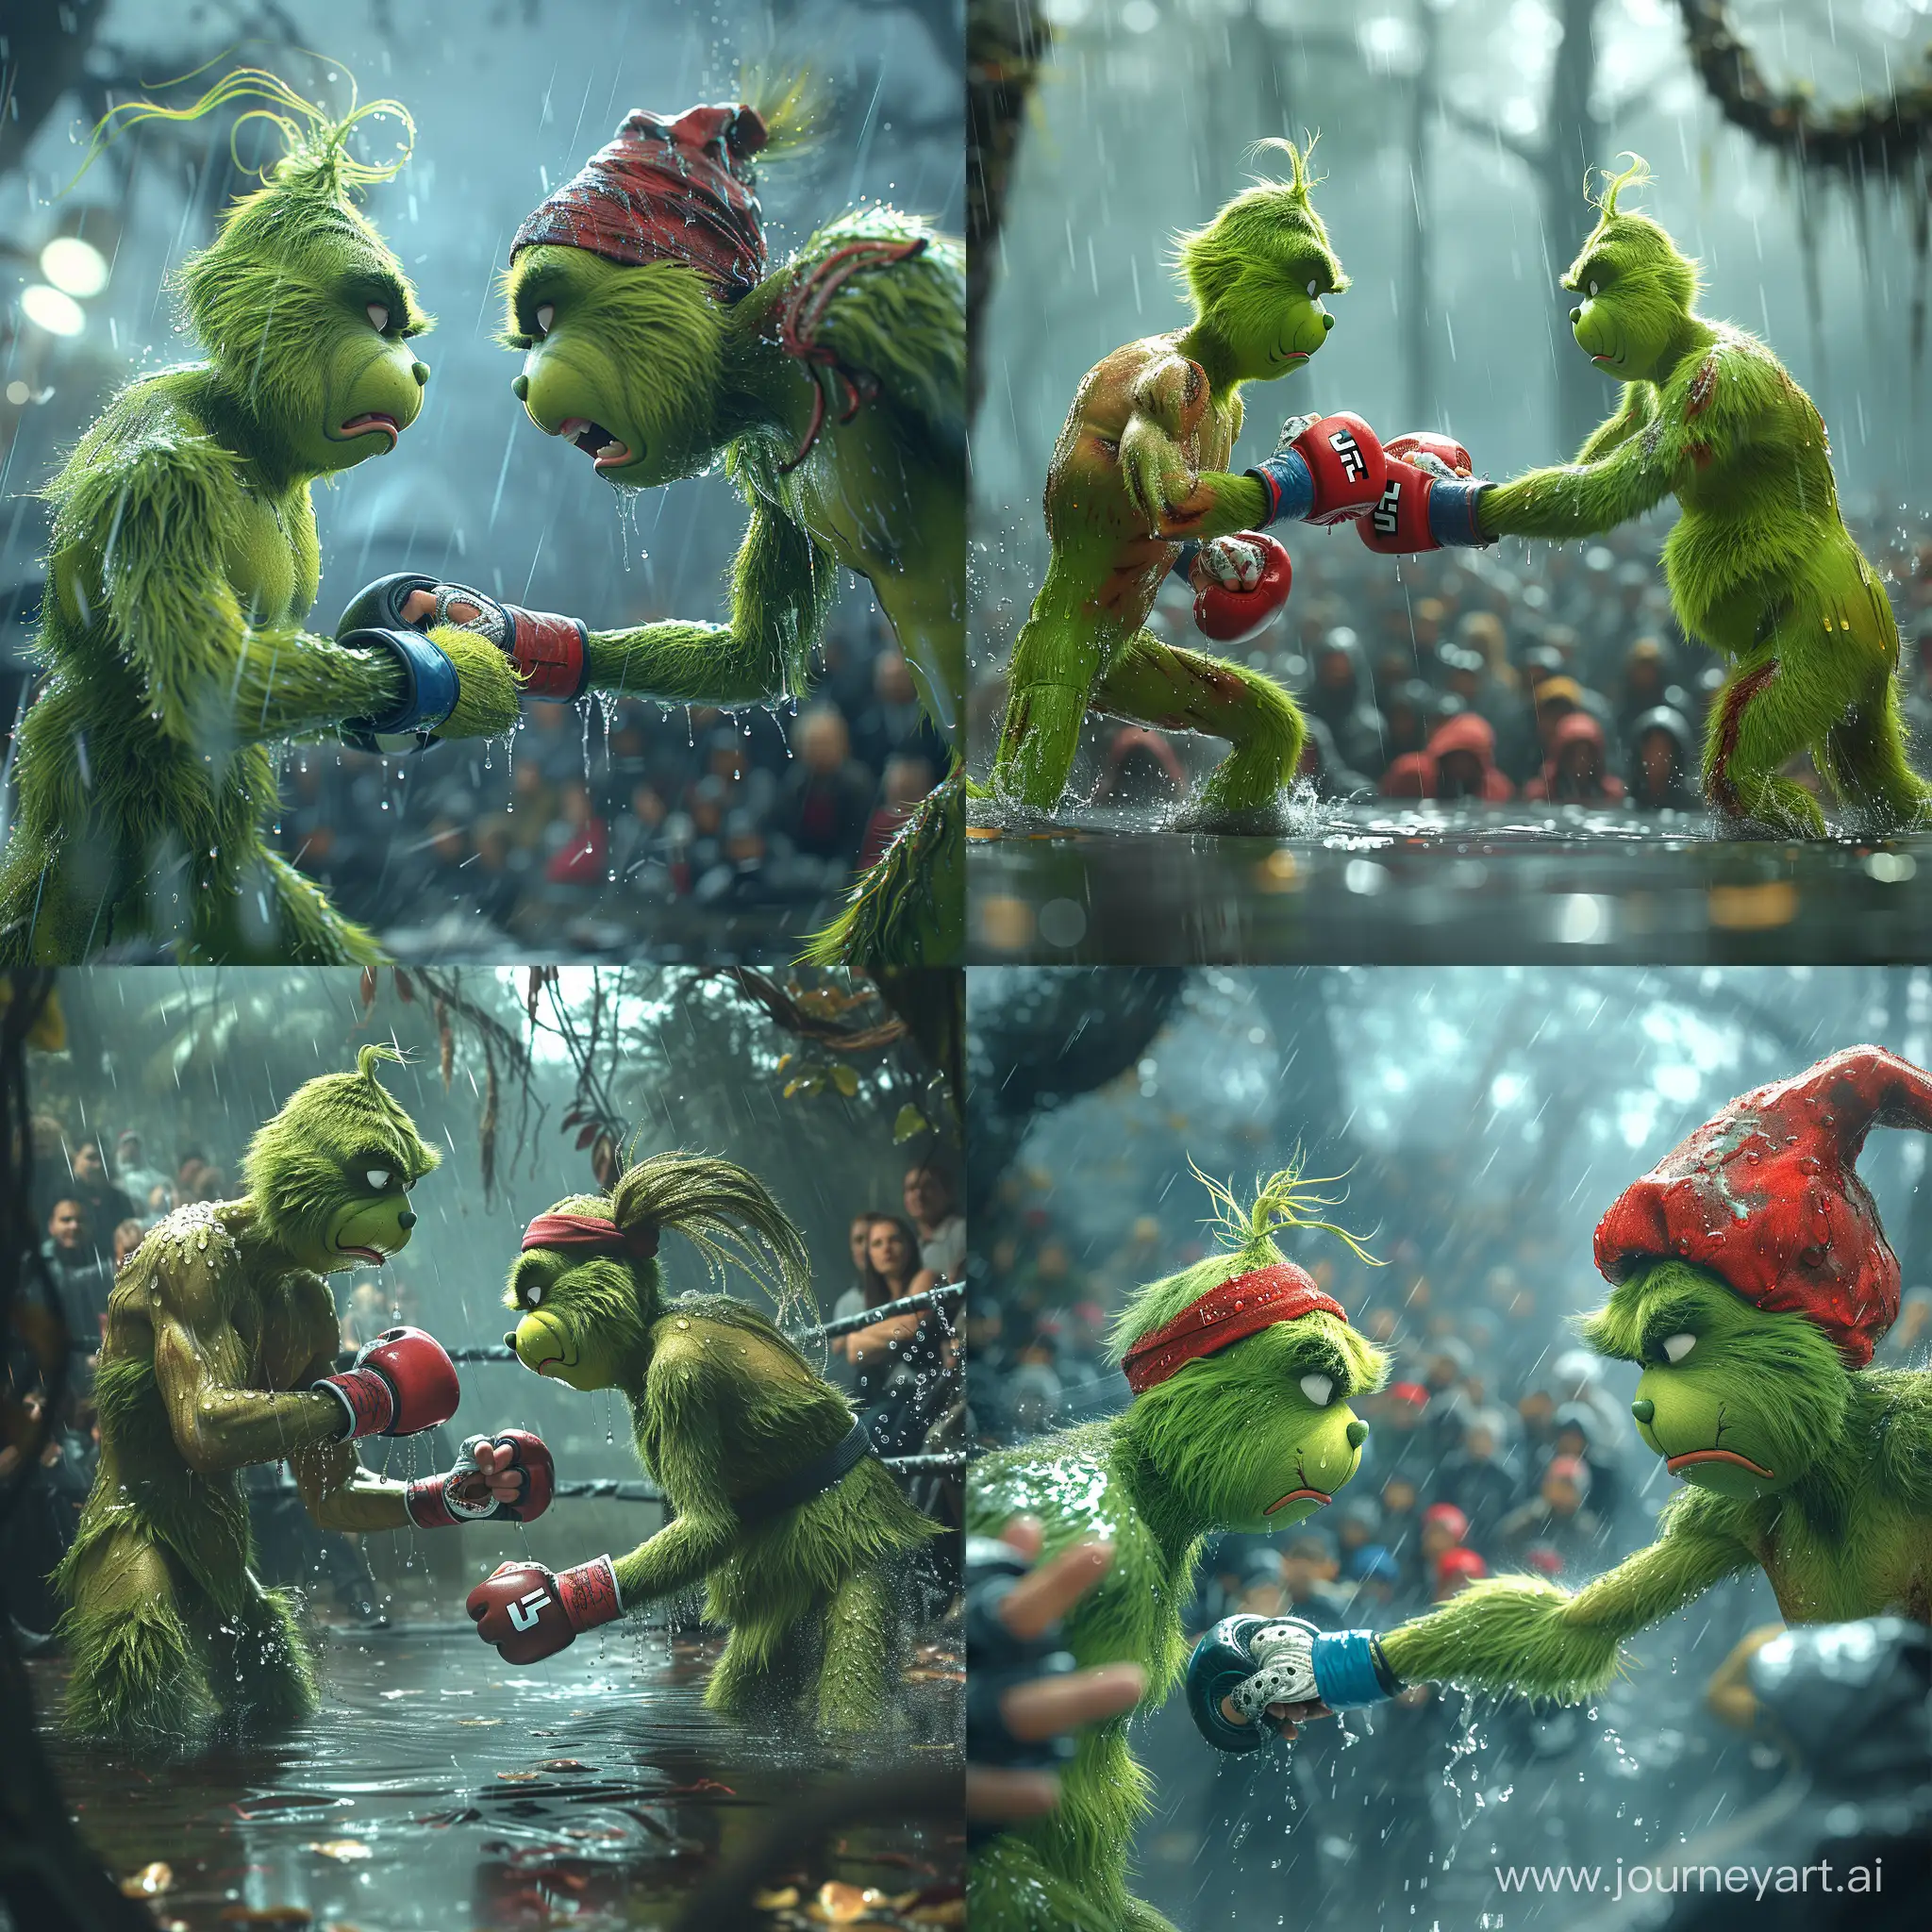 Jim-Carrey-and-the-Grinch-MMA-Match-in-the-Rain